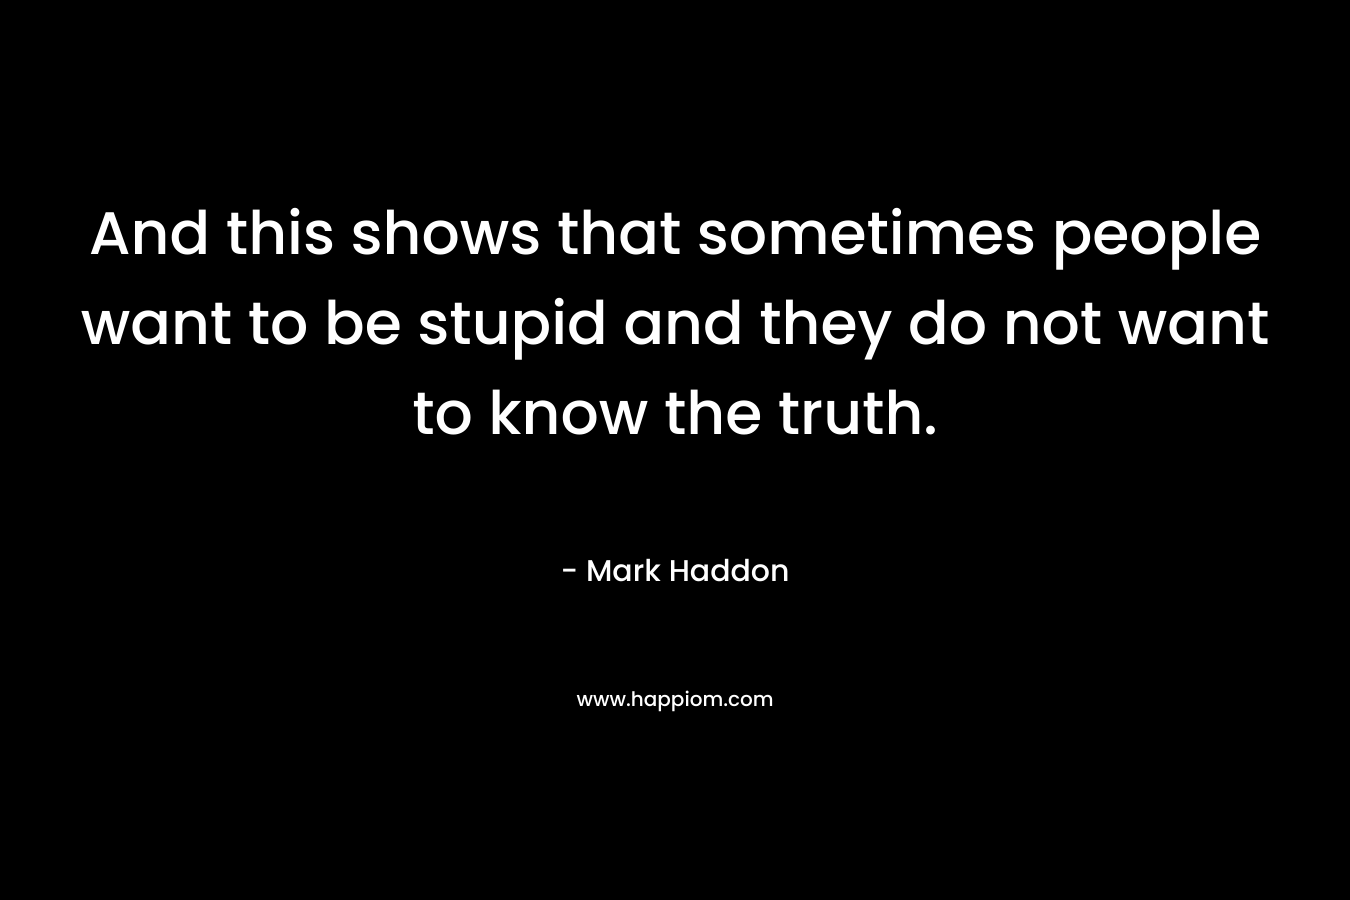 And this shows that sometimes people want to be stupid and they do not want to know the truth. – Mark Haddon